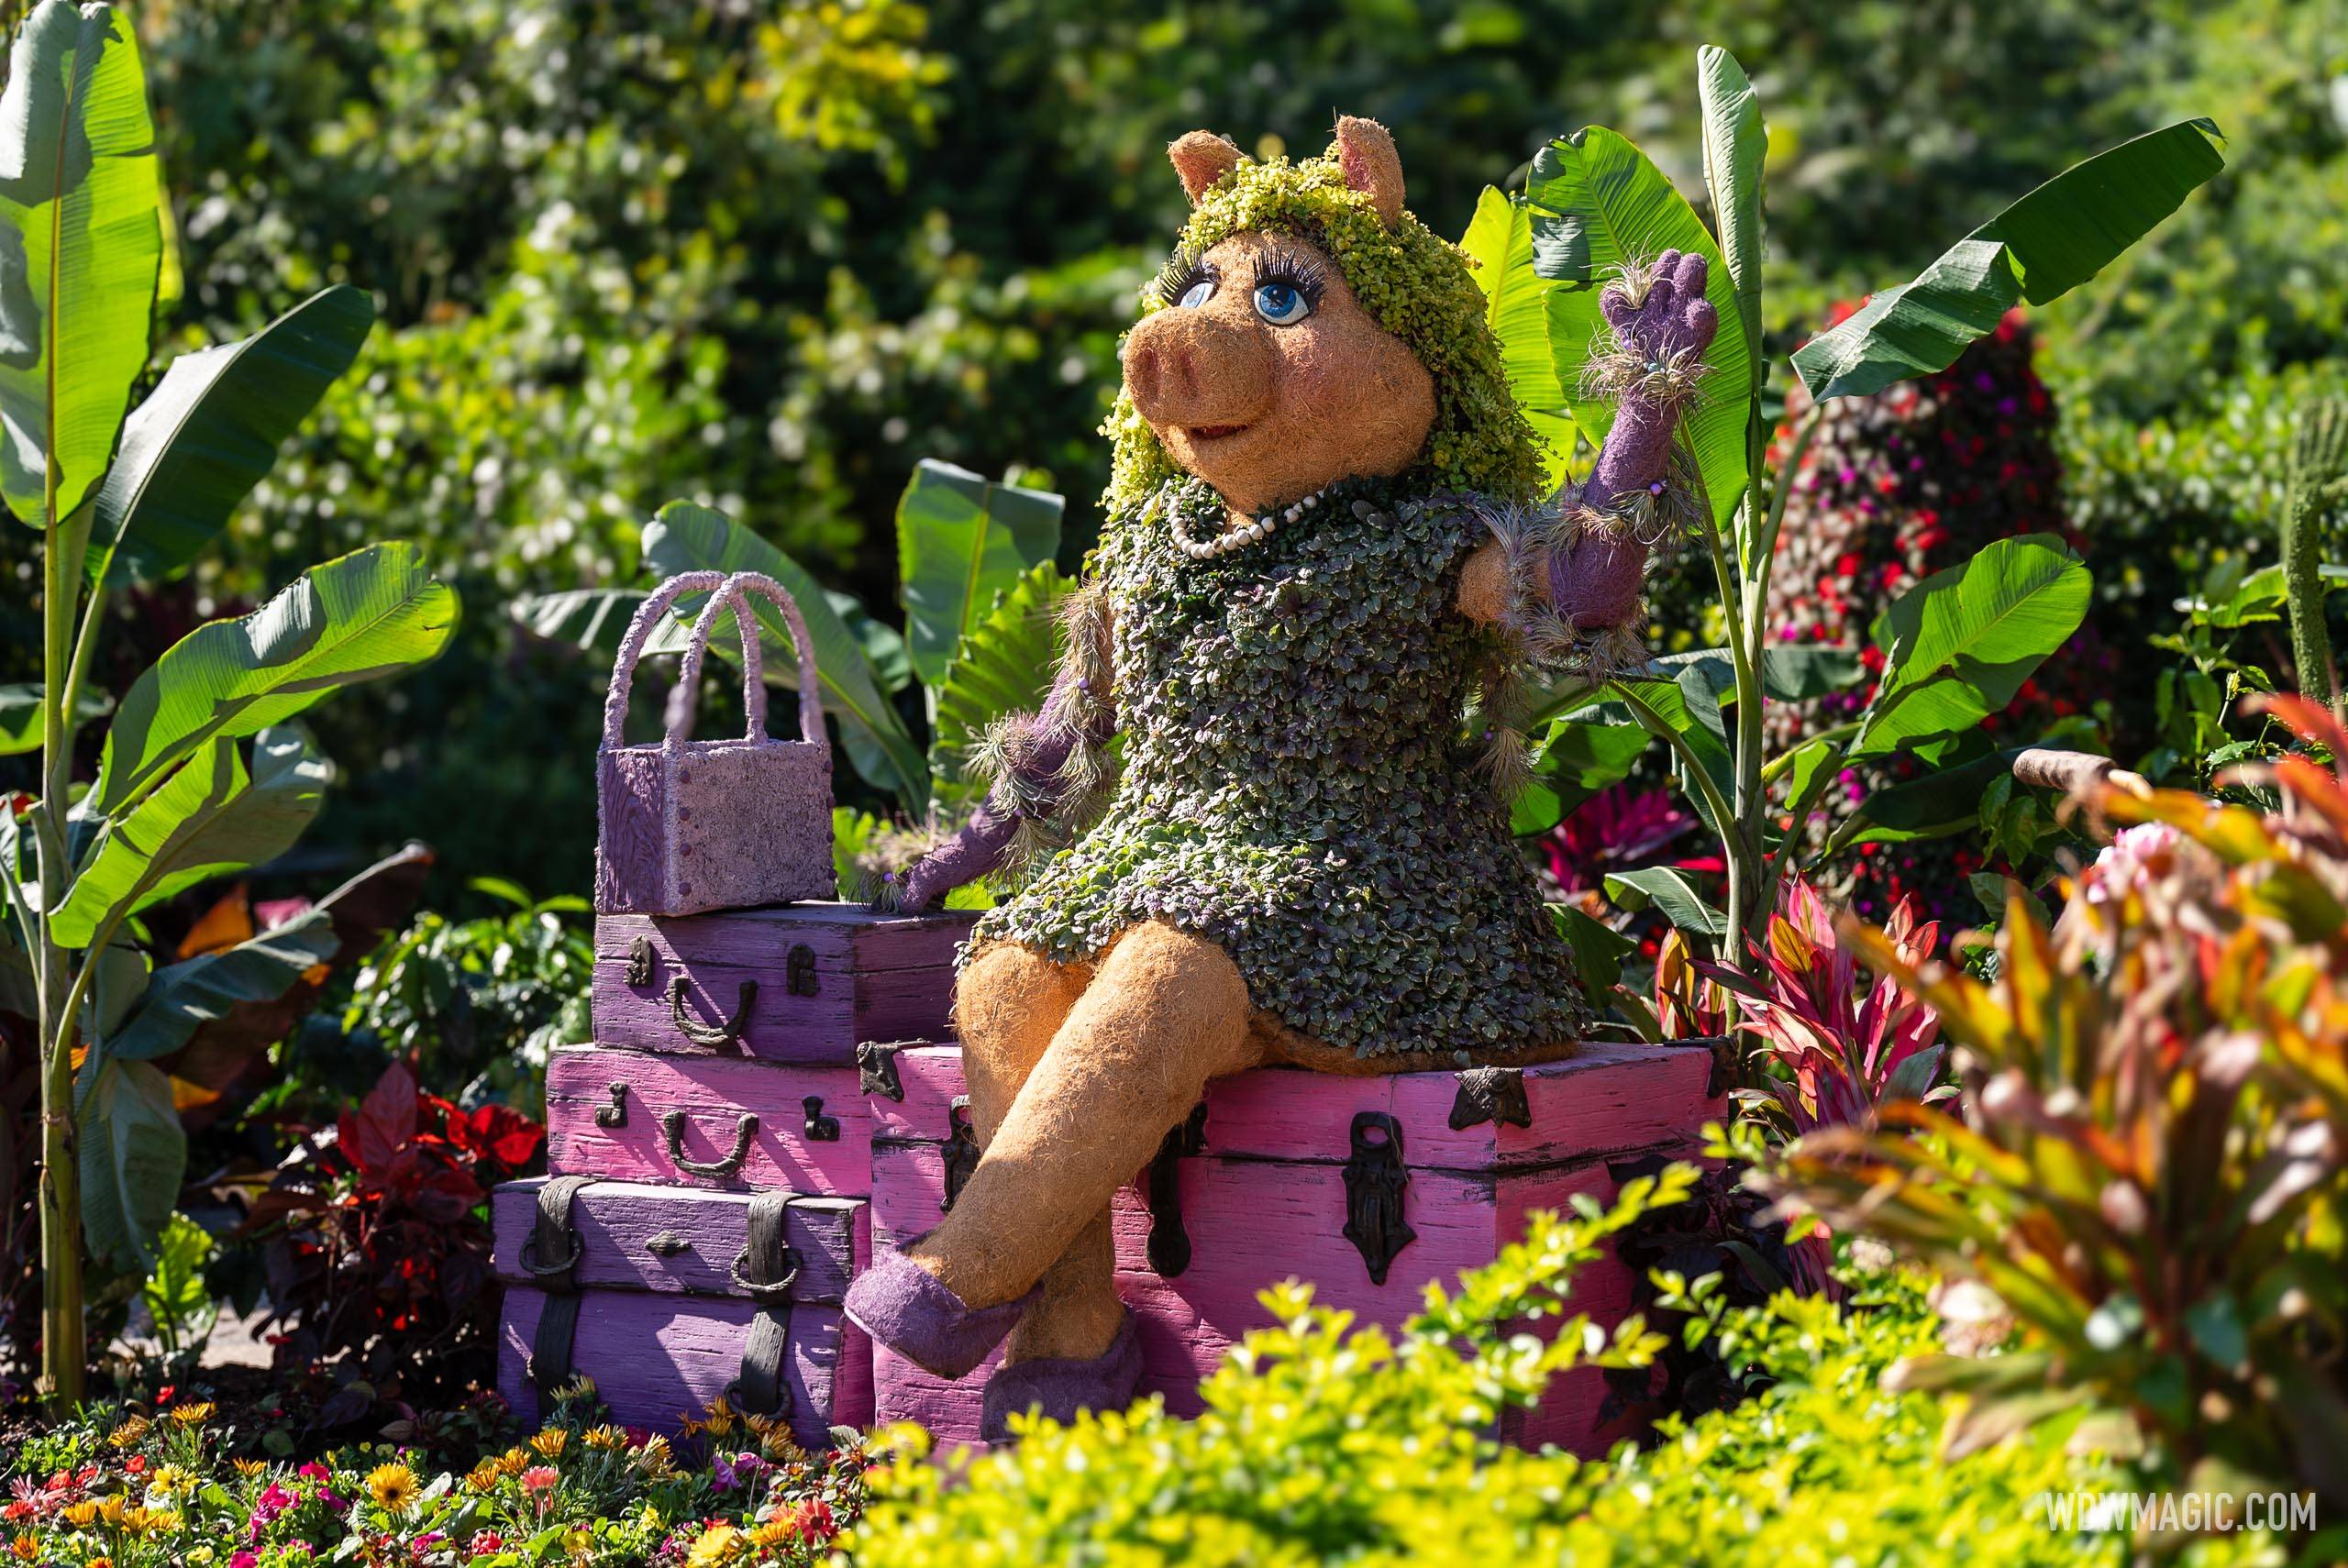 Miss Piggy, World Showcase – Between France and Morocco Pavilions